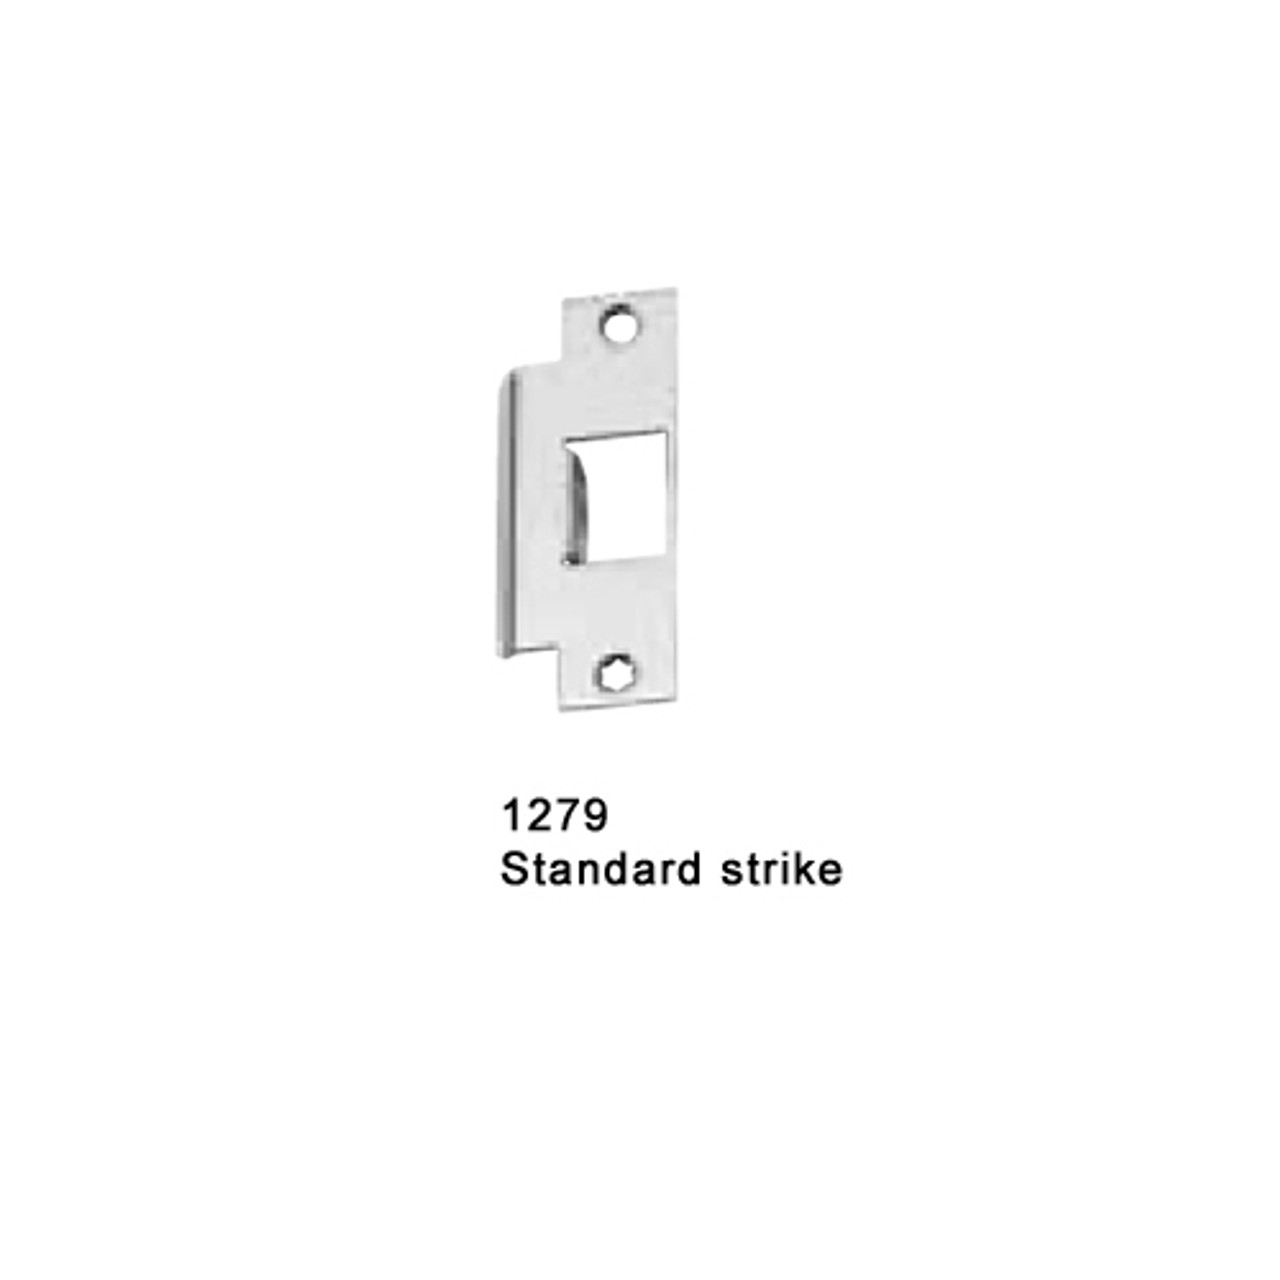 F-25-M-TP-US10-4-LHR Falcon 25 Series Fire Rated Mortise Lock Devices with 512TP Thumbpiece Trim in Satin Bronze